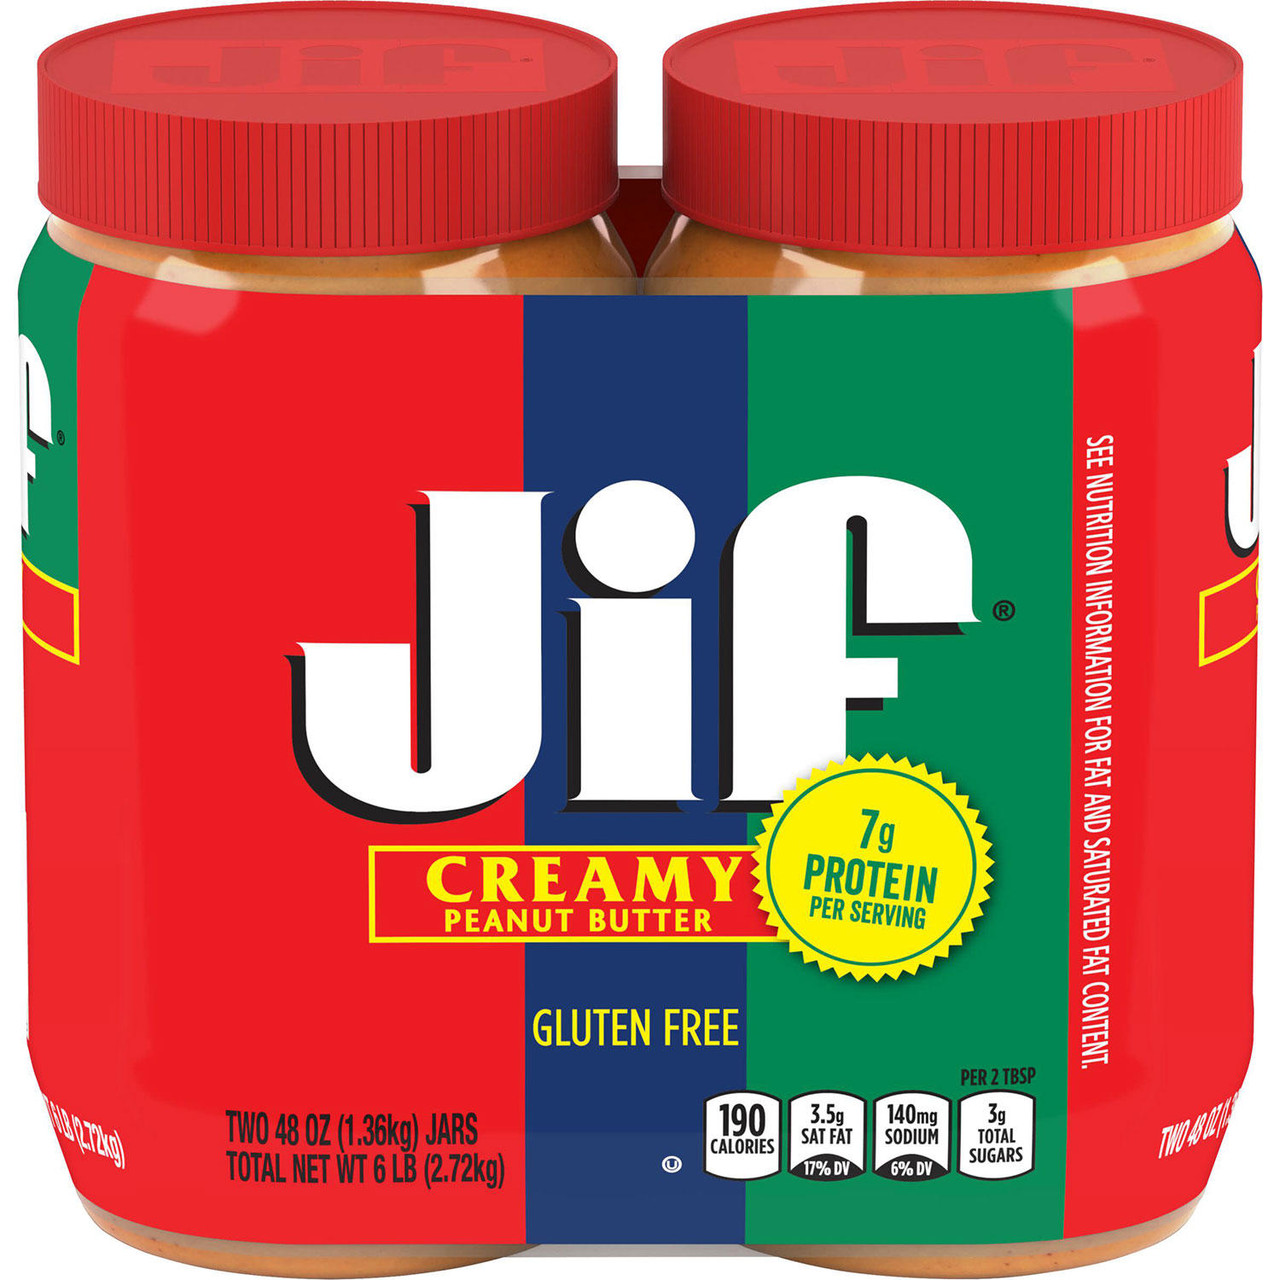 Jif Creamy Peanut Butter (48 oz., 2 pk.) - [From 47.33 - Choose pk Qty ] - *Ships from Miami